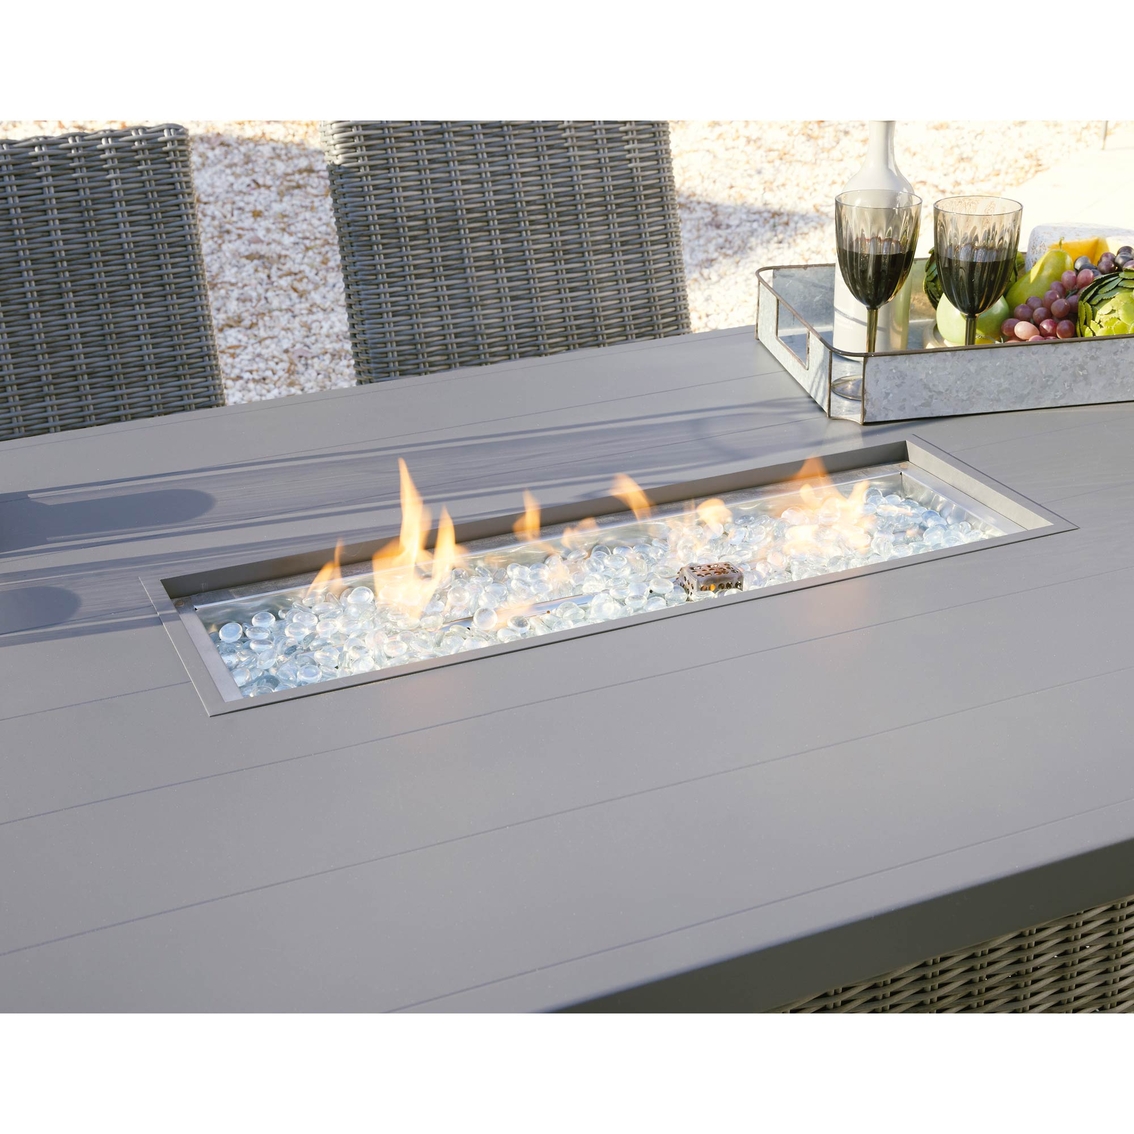 Signature Design by Ashley Palazzo Outdoor Bar Height Table with Fire Pit - Image 10 of 10